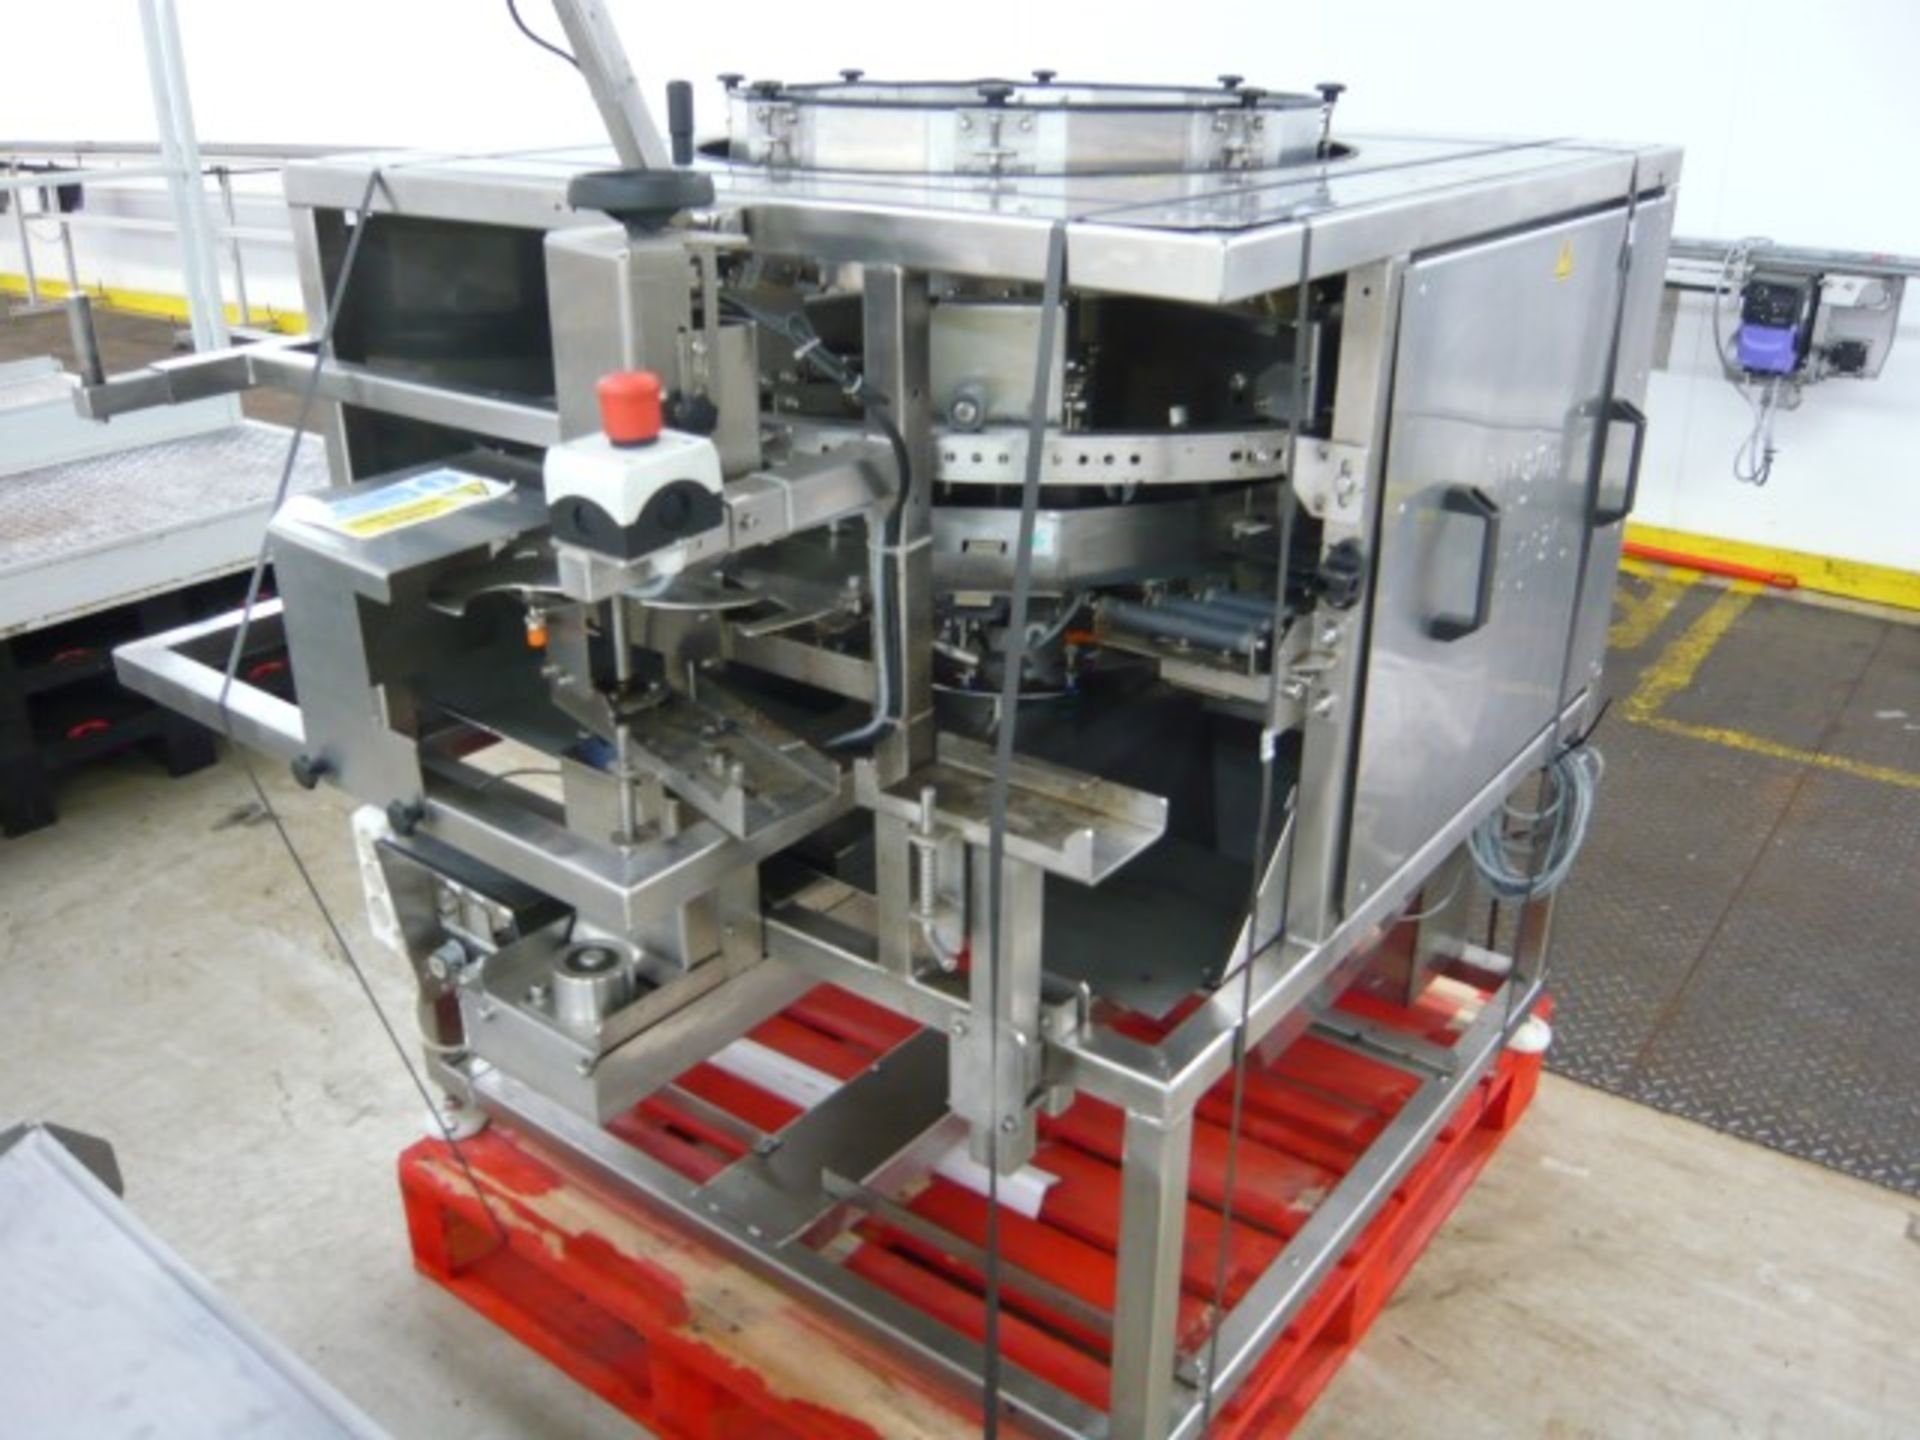 Blueberry weighing and packing line - Image 3 of 10